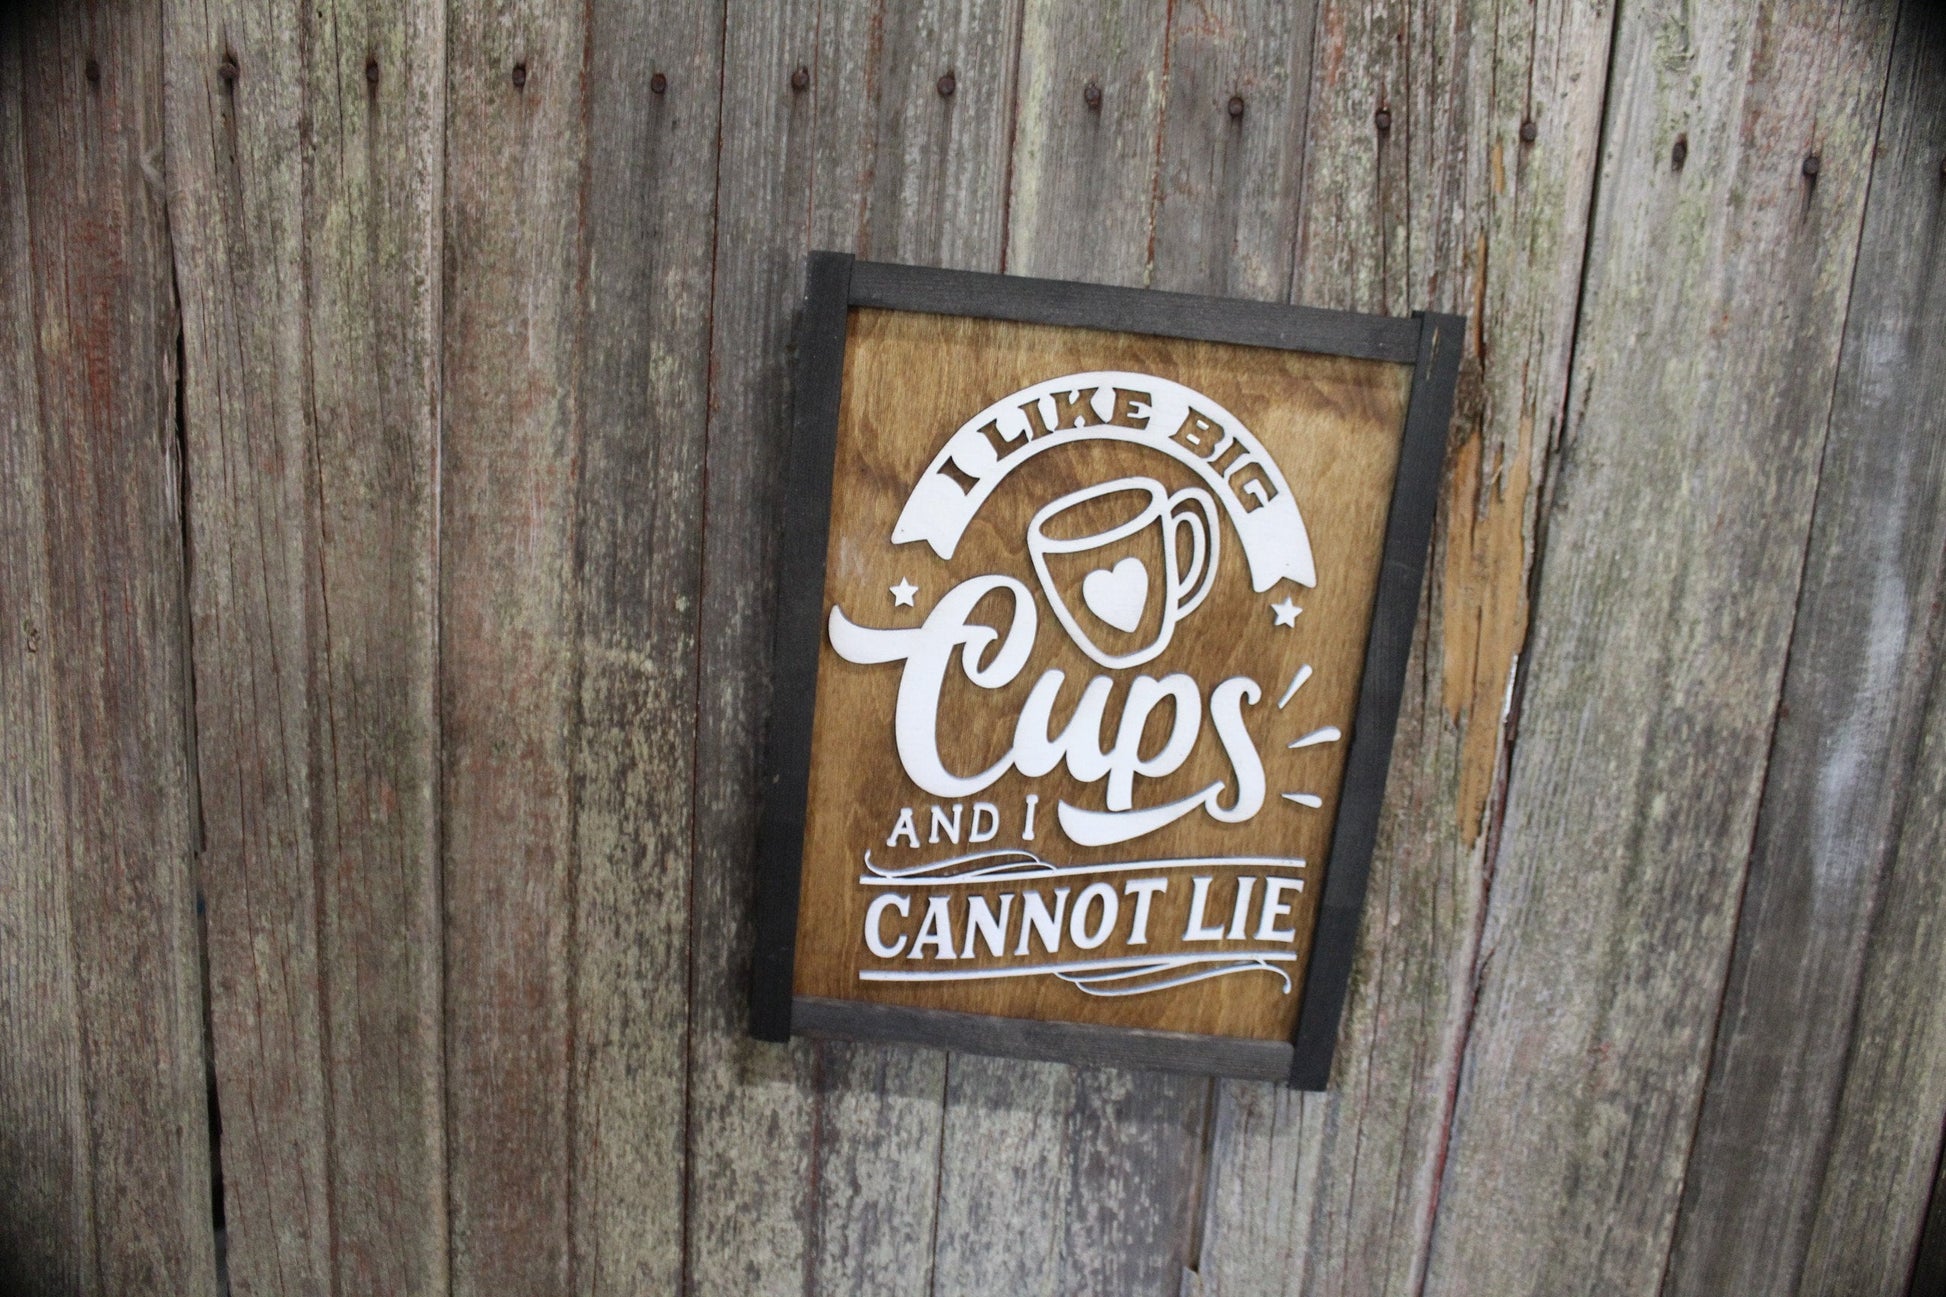 I Like Big Cups and I Can Not Lie Funny Coffee Bar Wood Sign Tea Coco 3D Raised Text Country Barn Farmhouse Cabin Wall Art Comic Silly